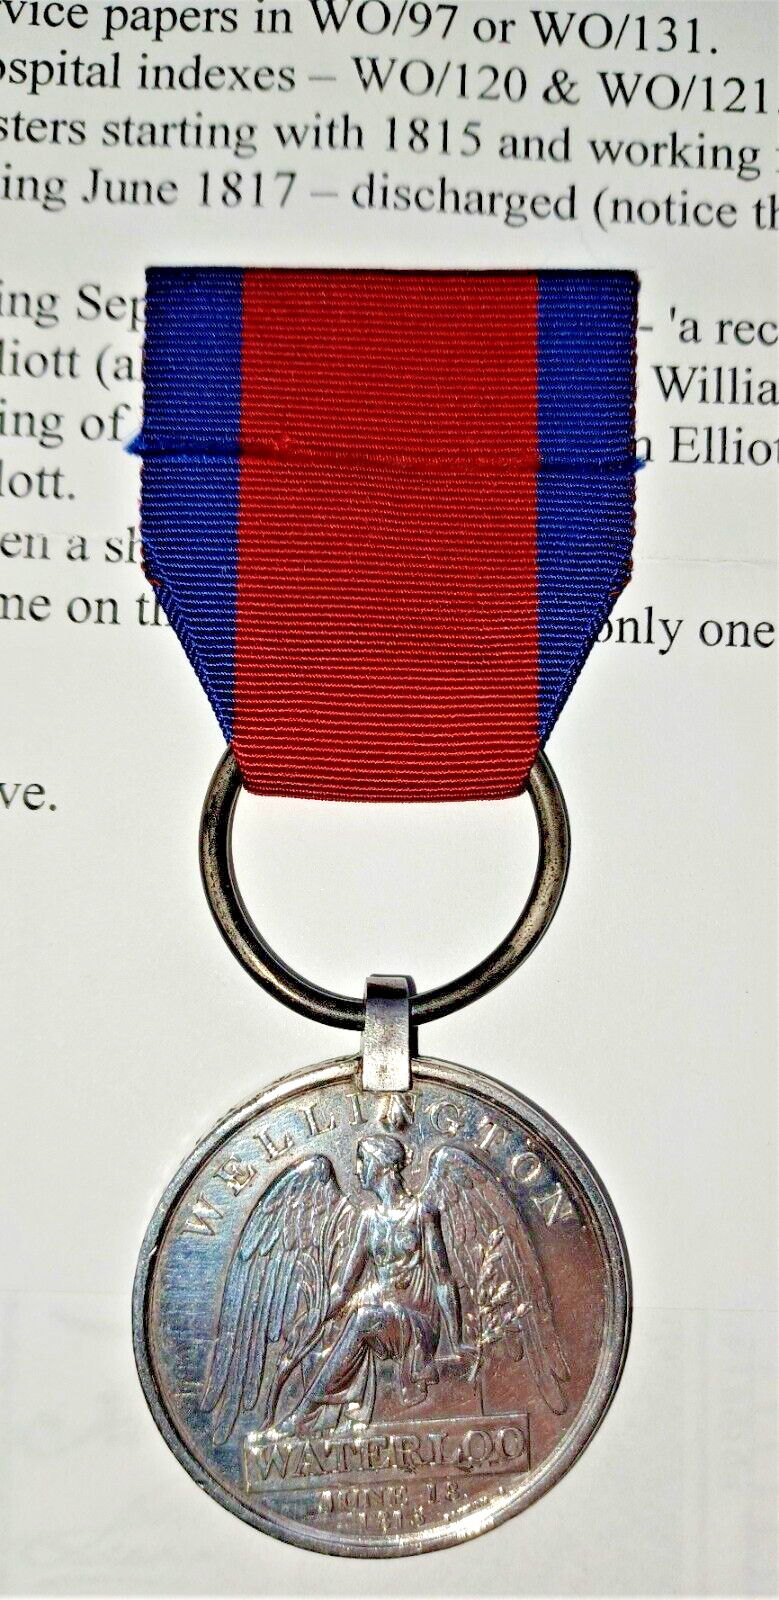 Battle of Waterloo Medal 1815 to Ellott, 15th King's Hussars